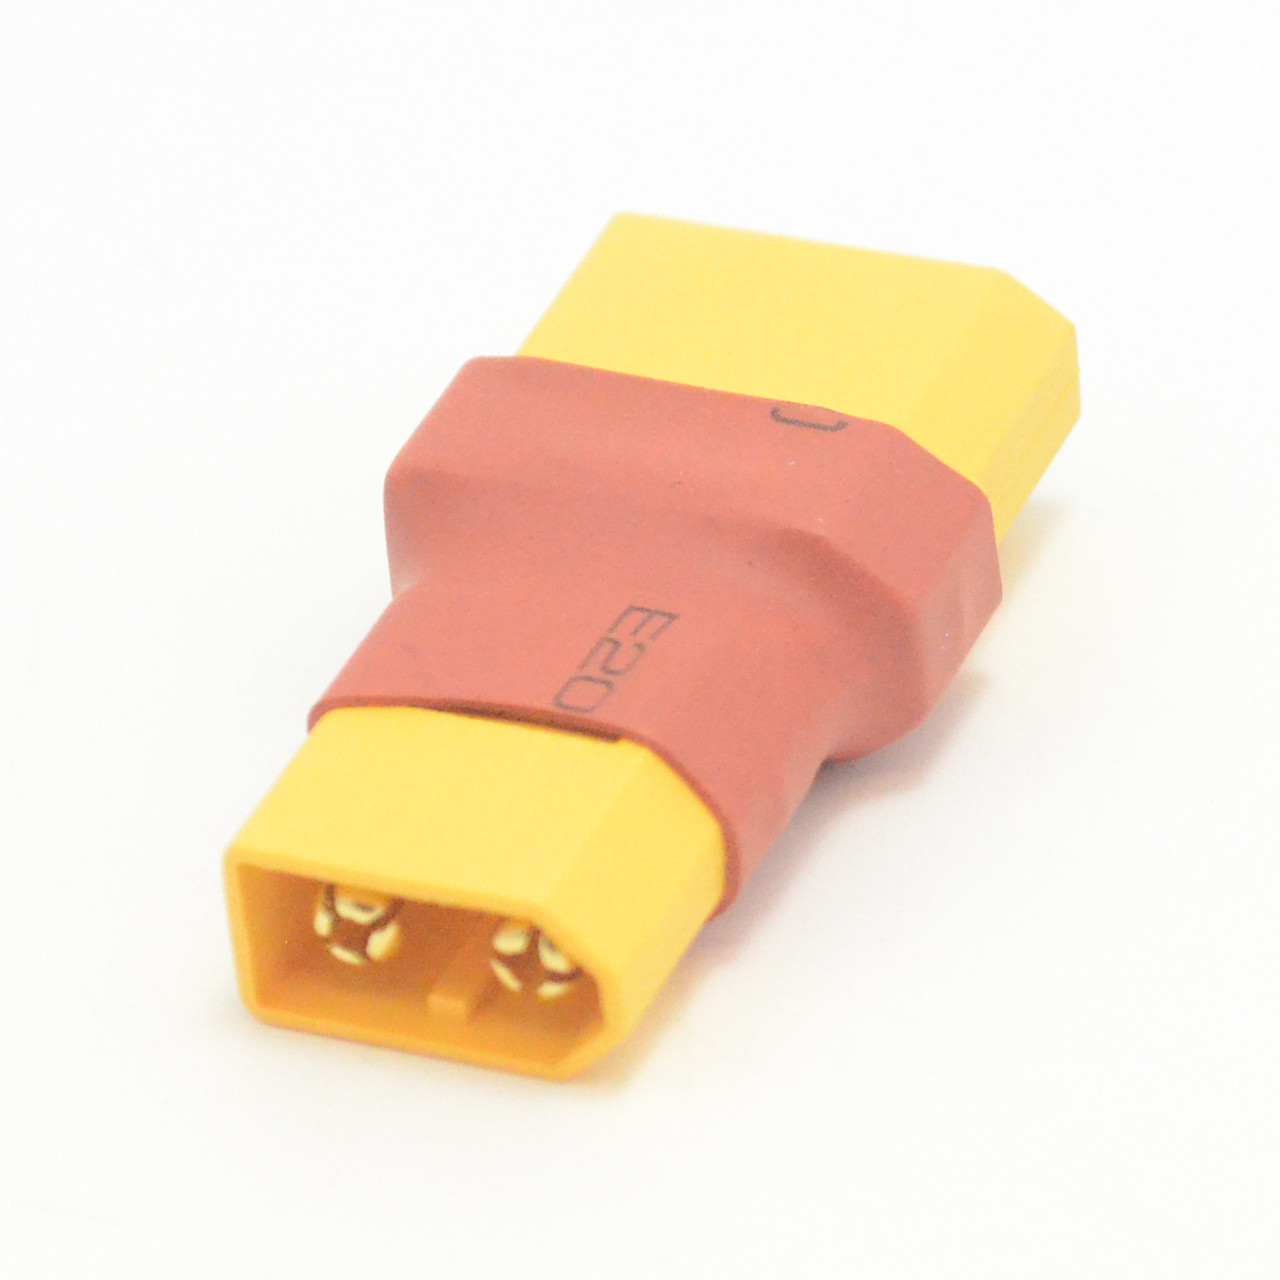 XT-60 Male to XT-90 Female Conversion Connector - RC Accessory